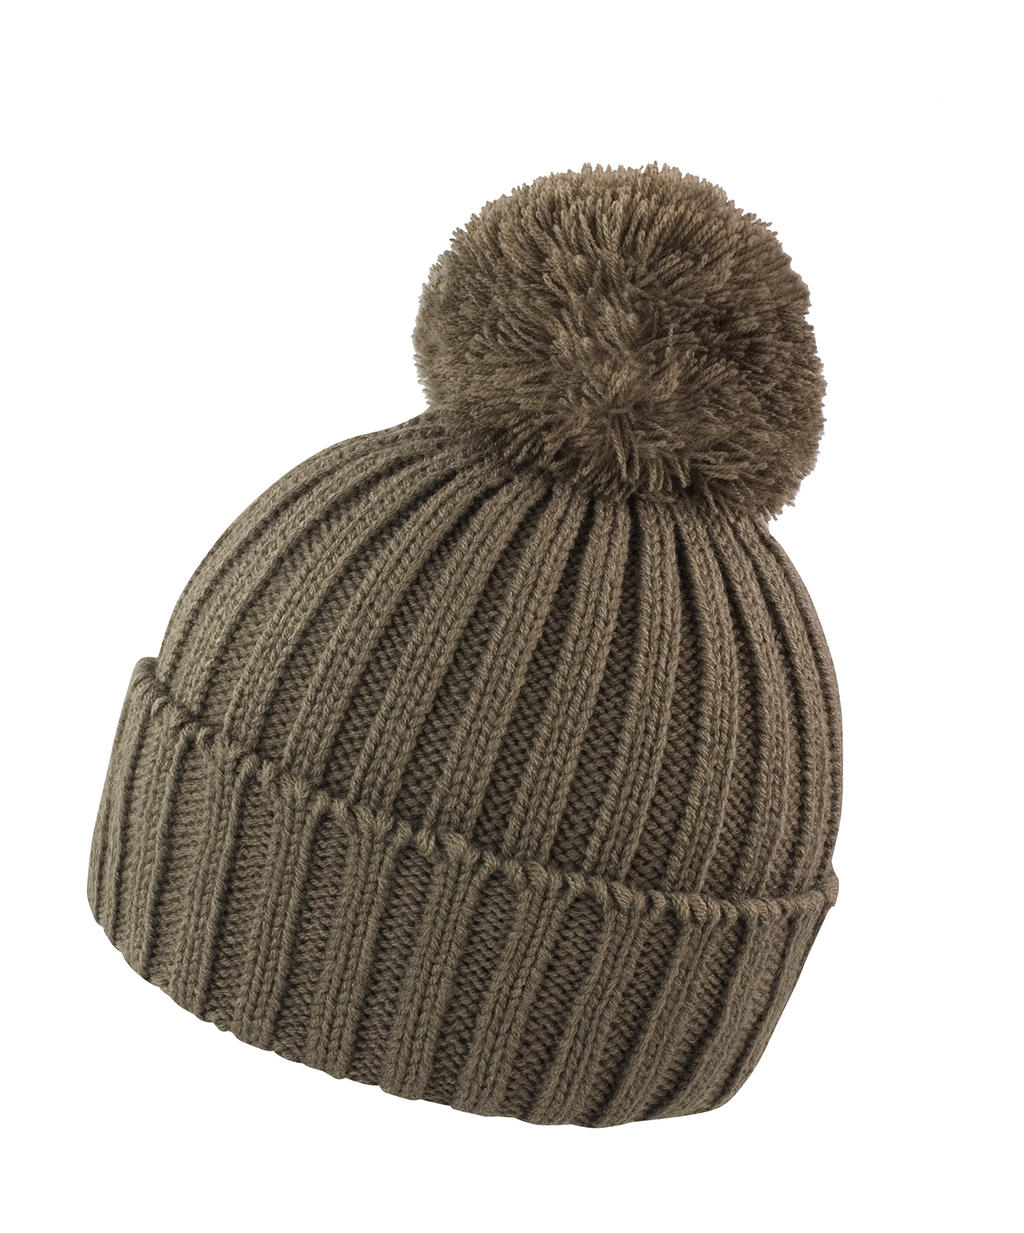  Hdi Quest Knitted Hat in Farbe Fennel